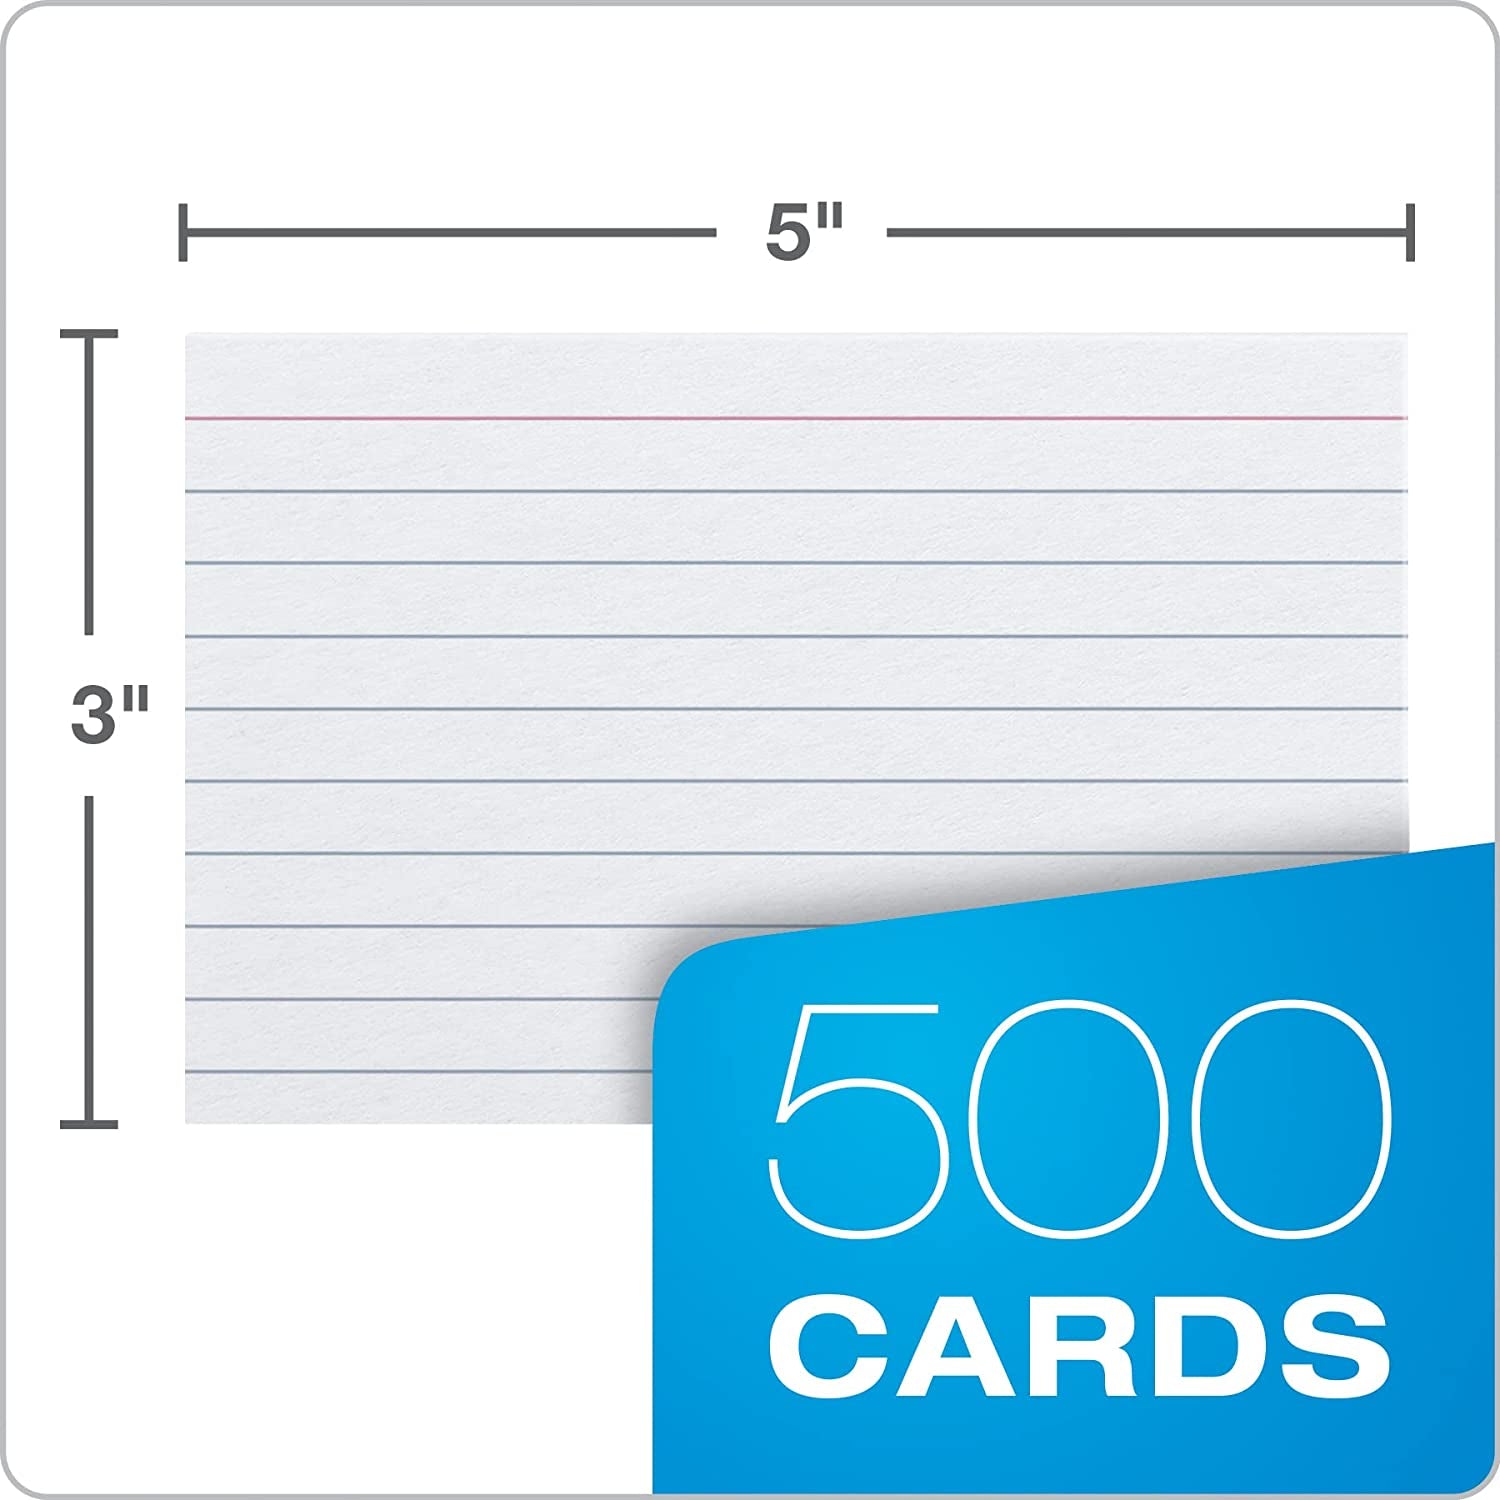 Index Cards, 500 Pack, 3X5 Index Cards, Ruled on Front, Blank on Back, White, 5 Packs of 100 Shrink Wrapped Cards ()